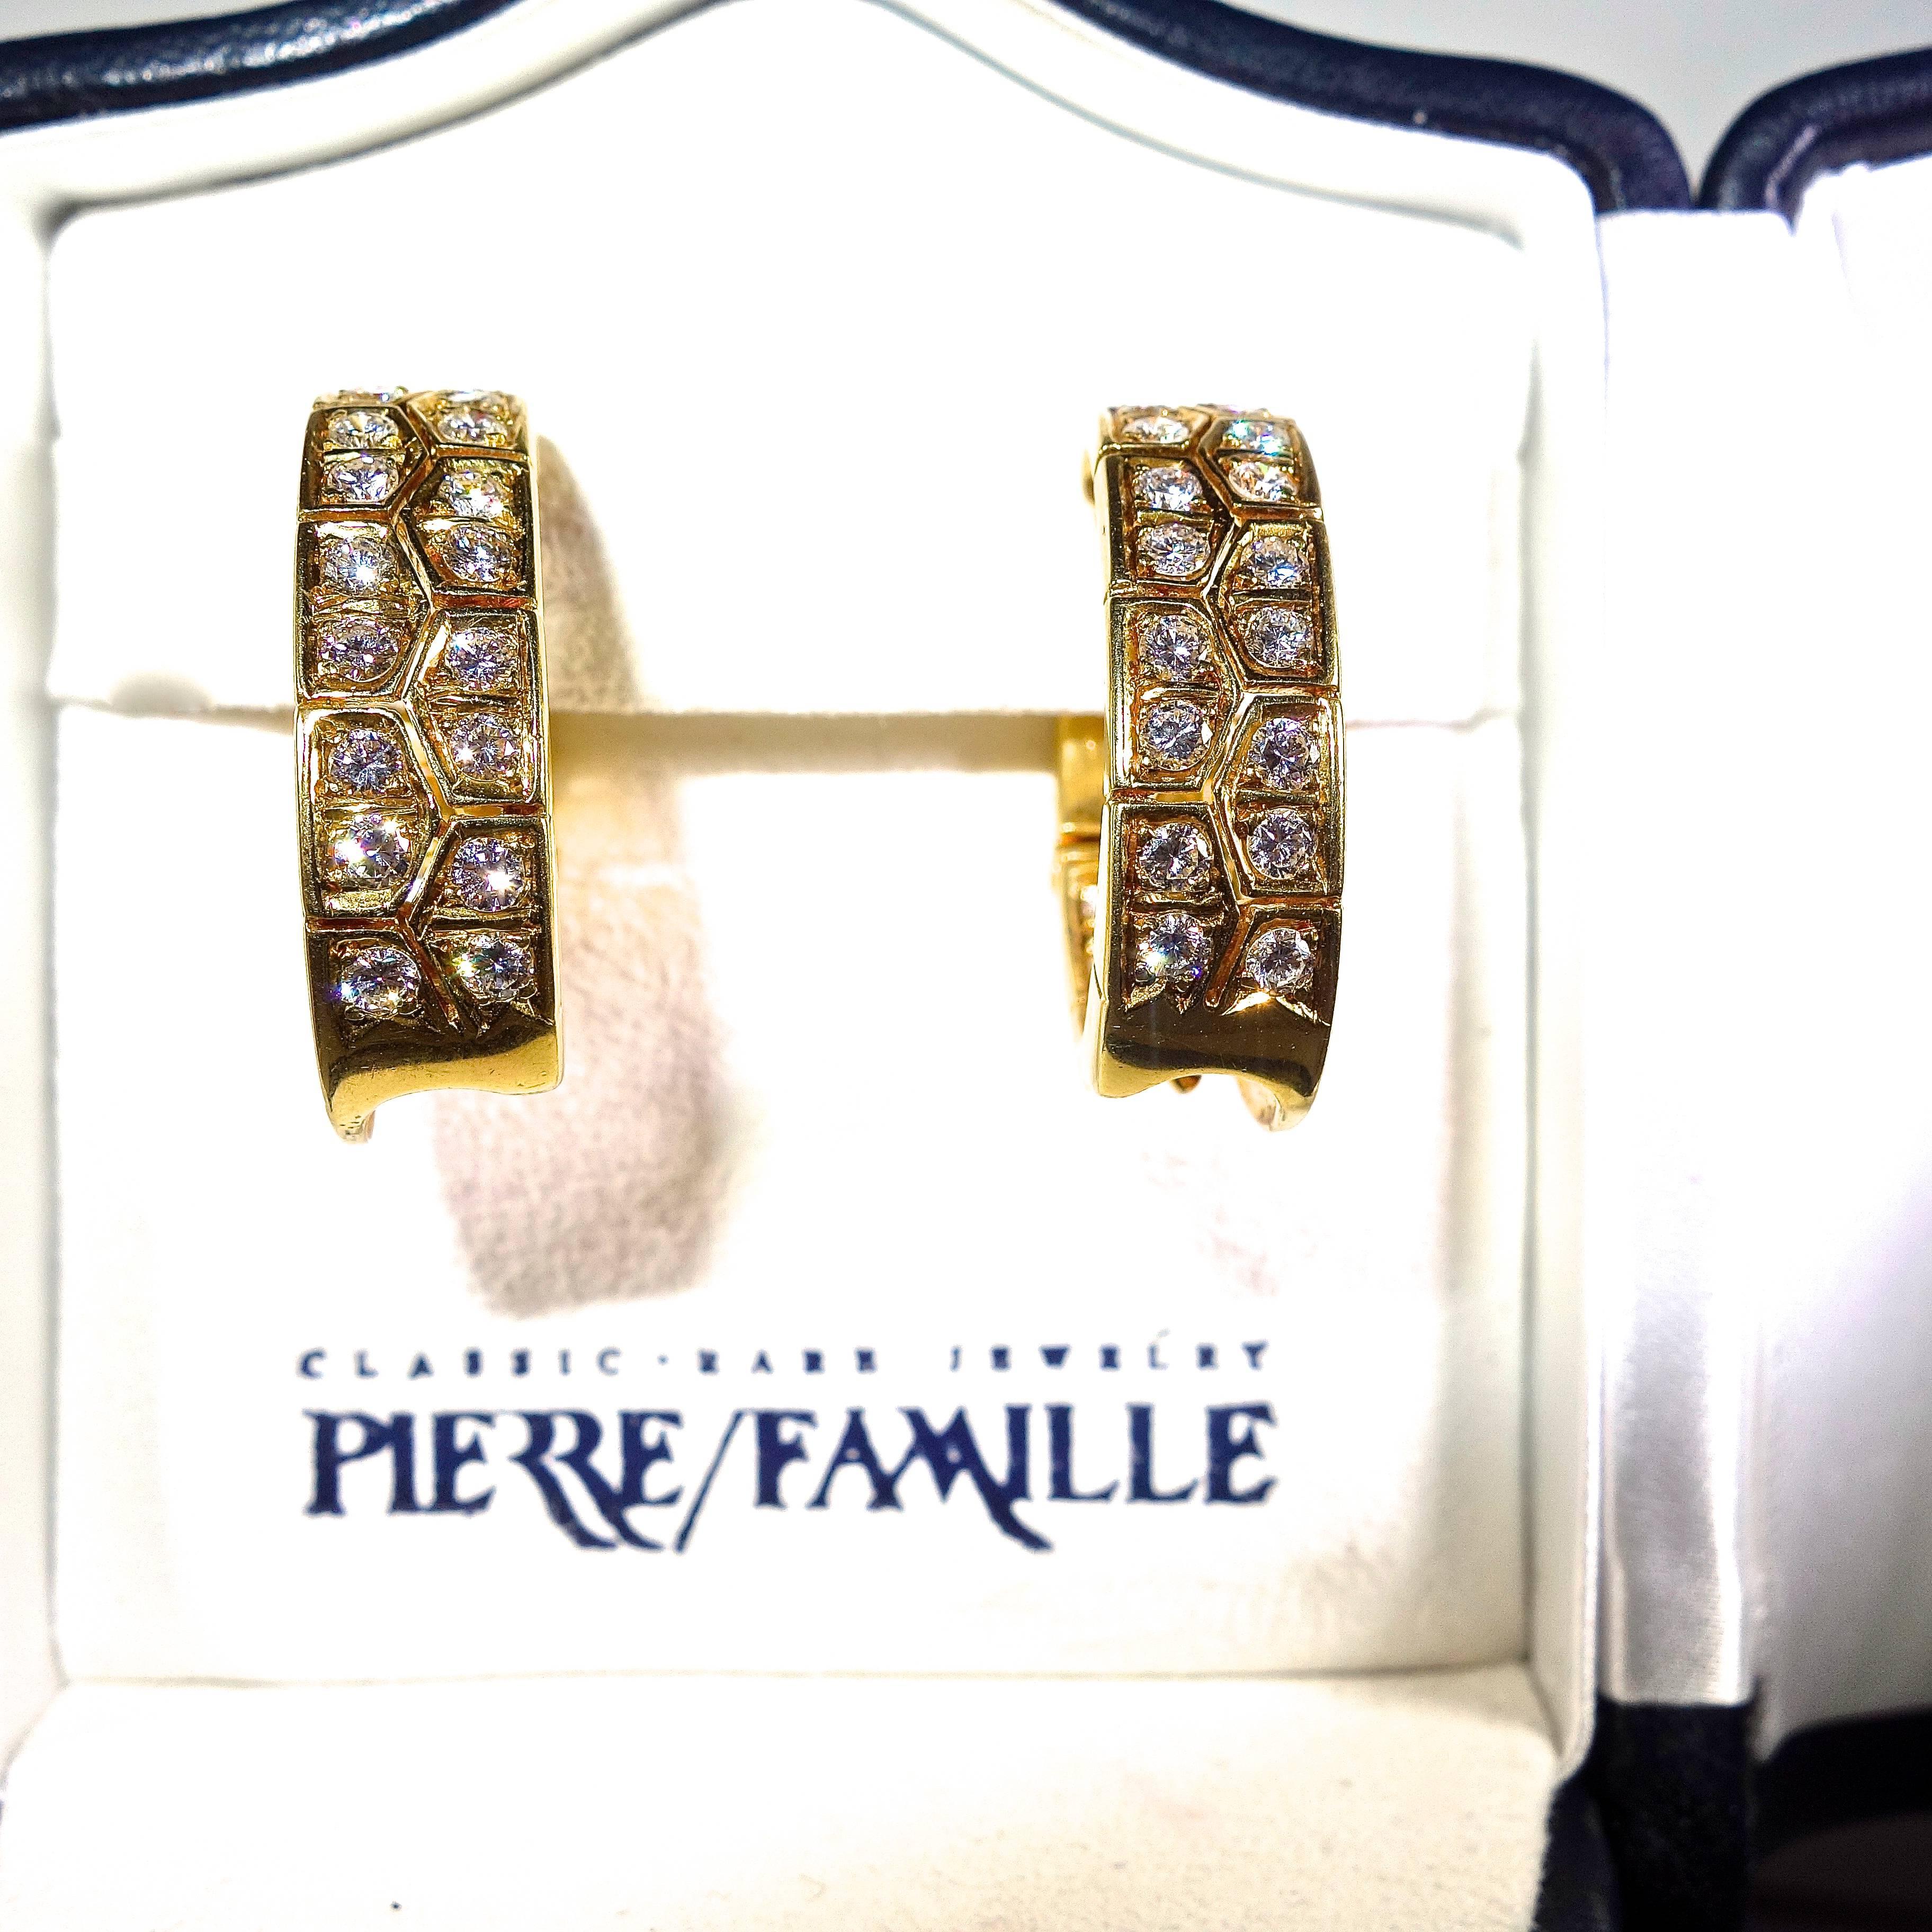 18K yellow gold stylized hoops with 60 diamonds weighing approximately 3 cts.  All of these diamonds are collection quality, D/E/F, VVS.  These earrings are signed and numbered with French hallmarks.  The diamonds are both on the inside and outside